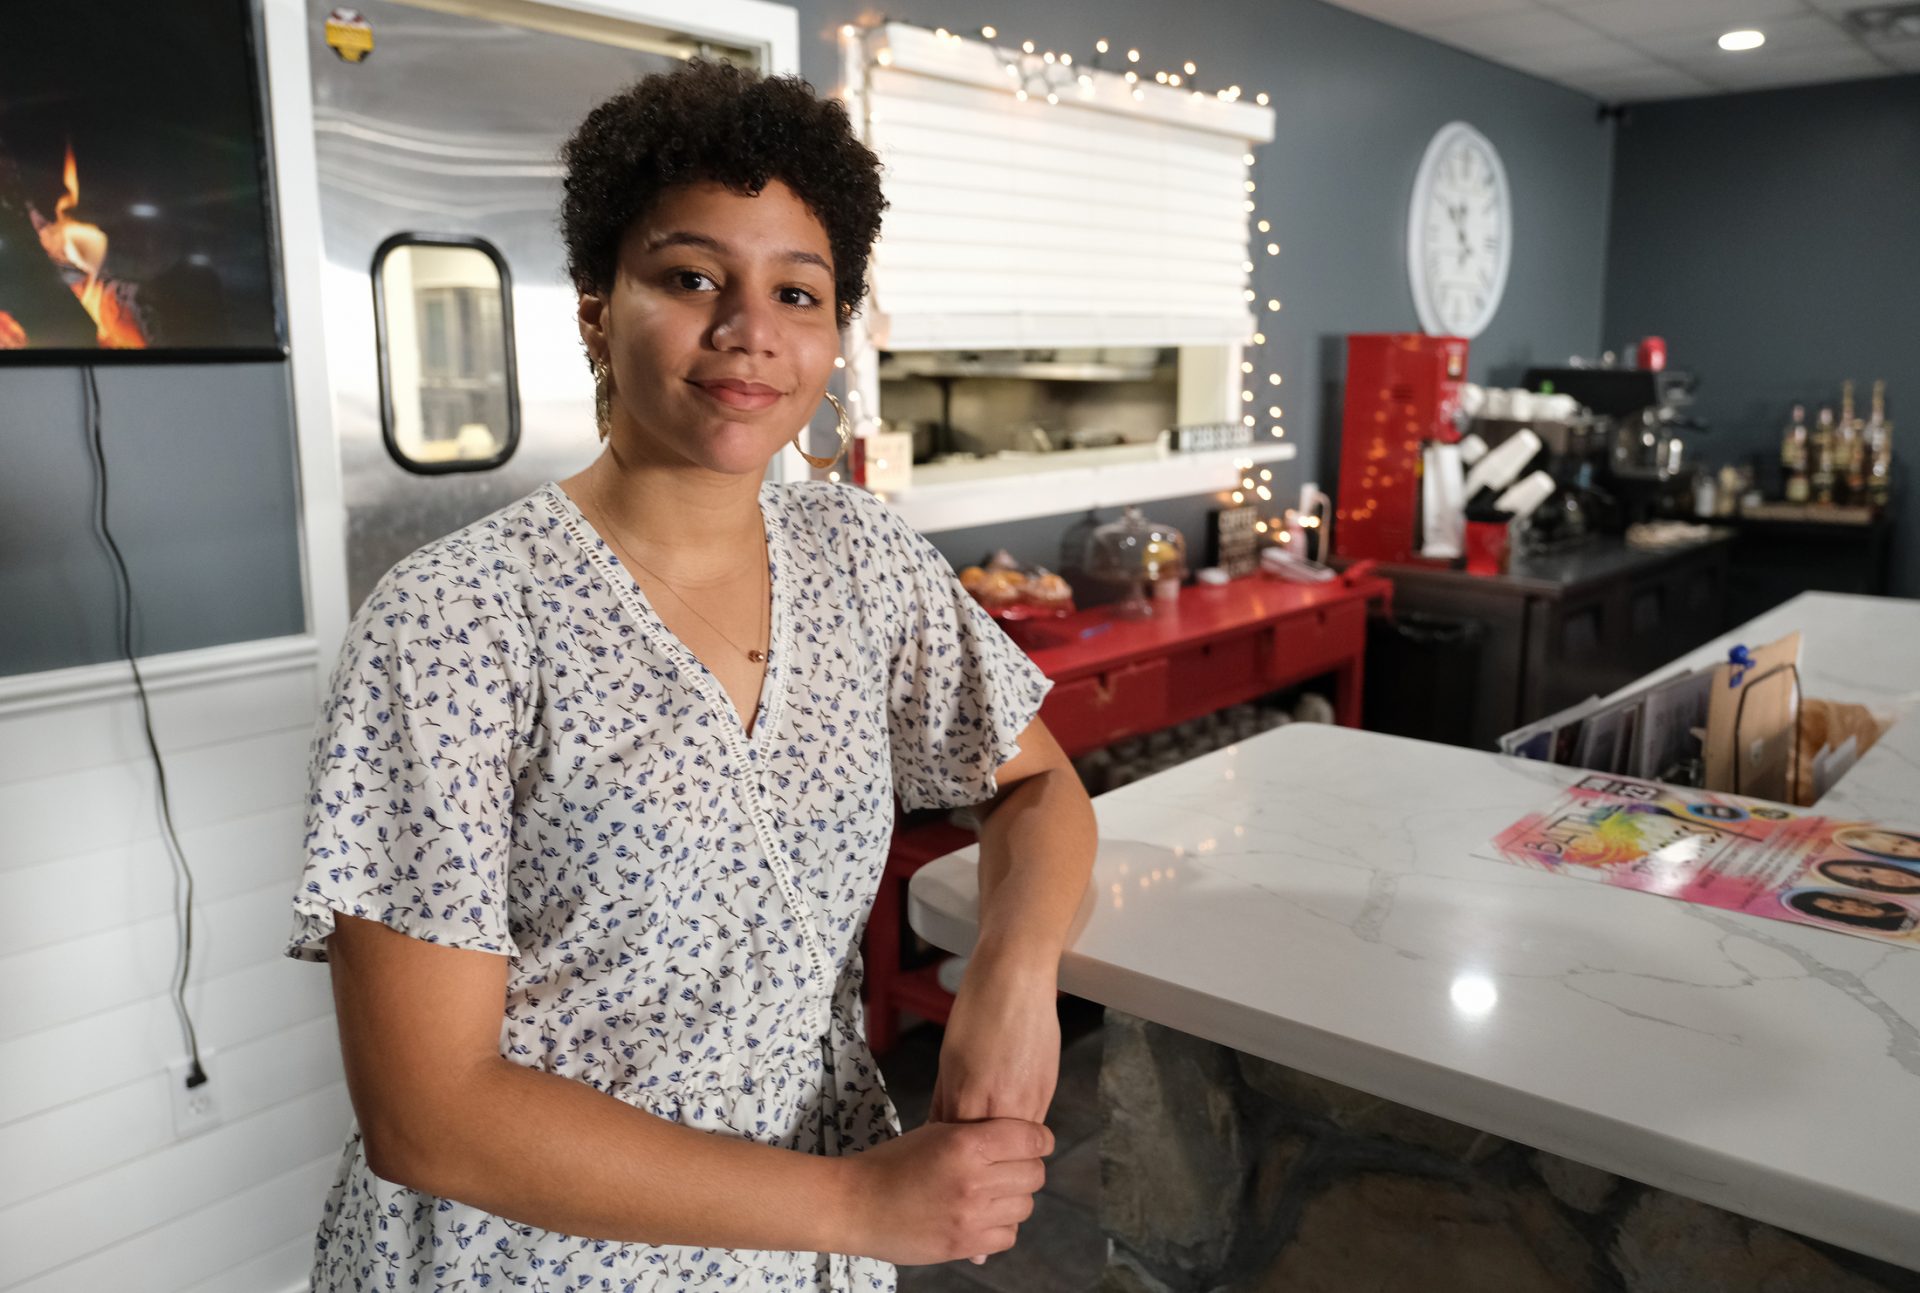 Employee and student Genesis Munoz, of Reading, stands at the counter Jan. 15, 2020, at Mi Casa Su Casa in Reading, Pennsylvania.